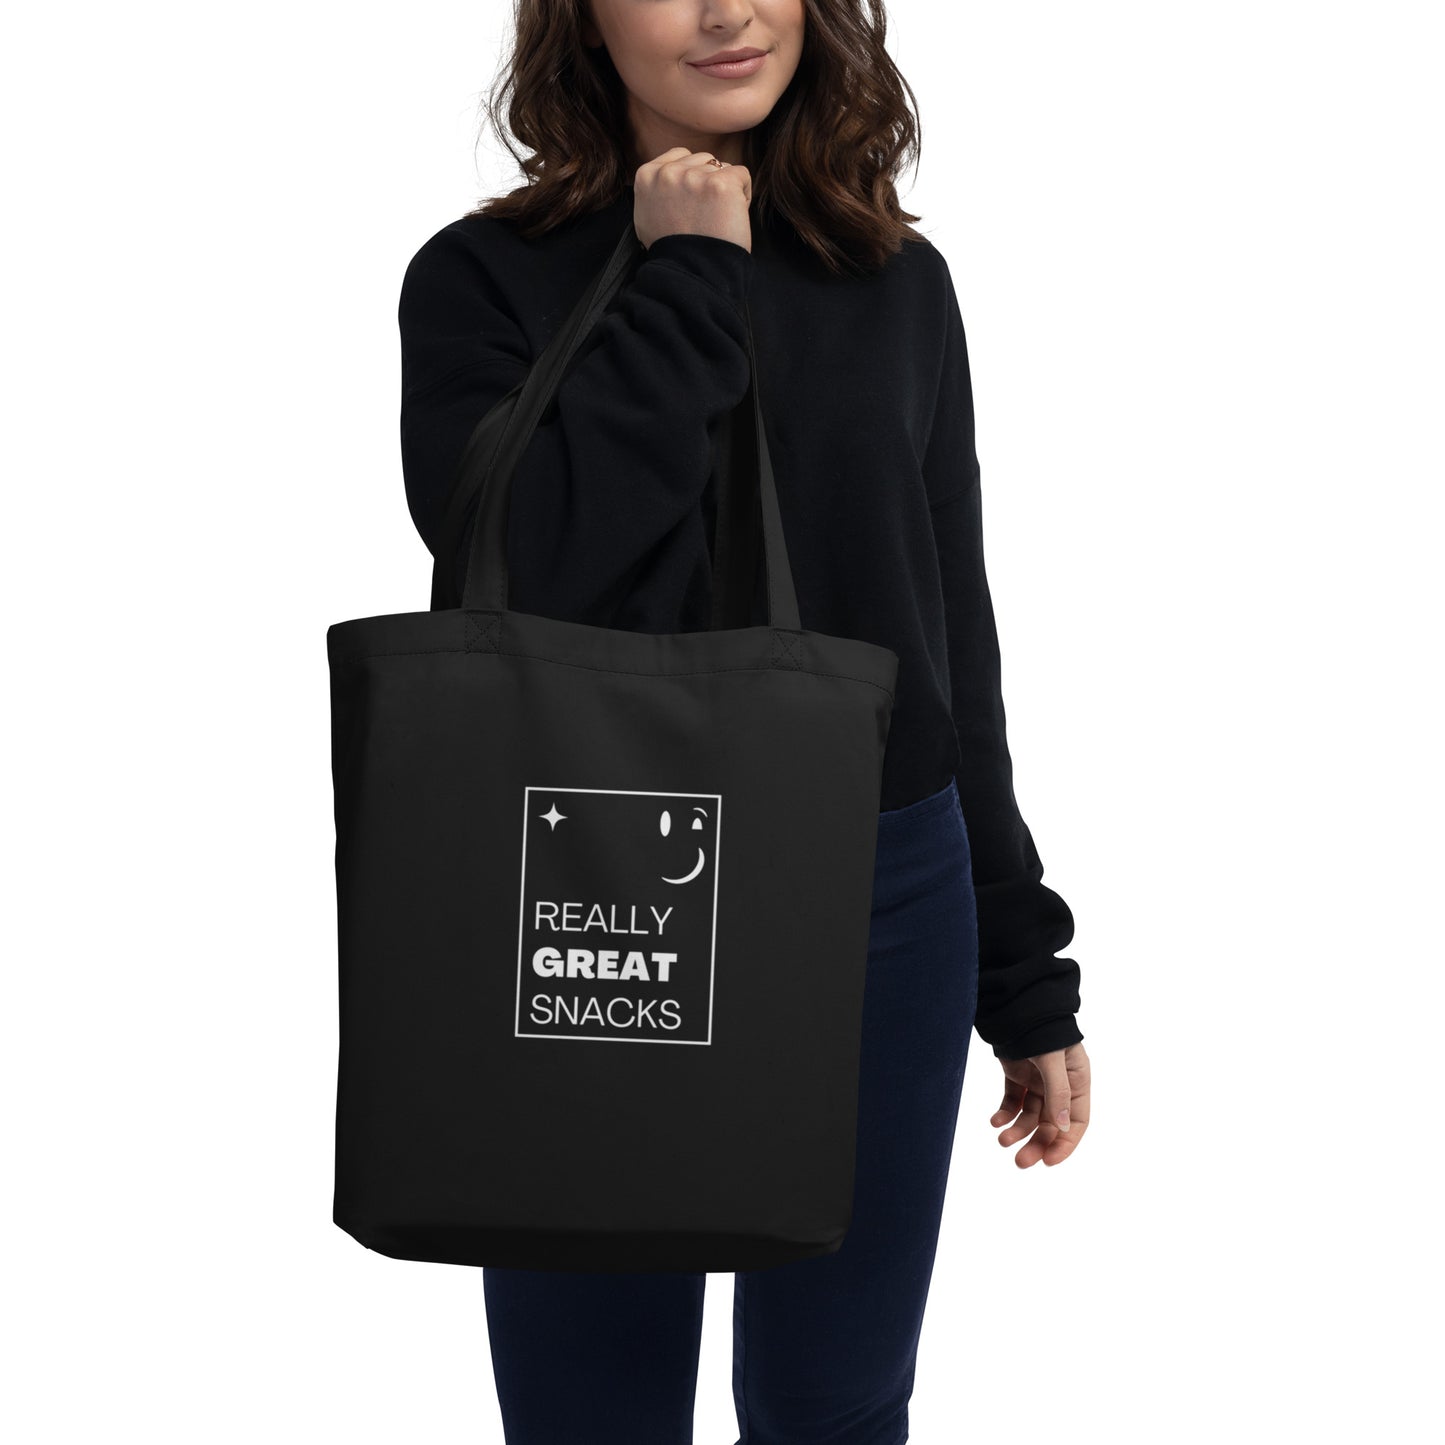 Really Great Snacks Tote Bag